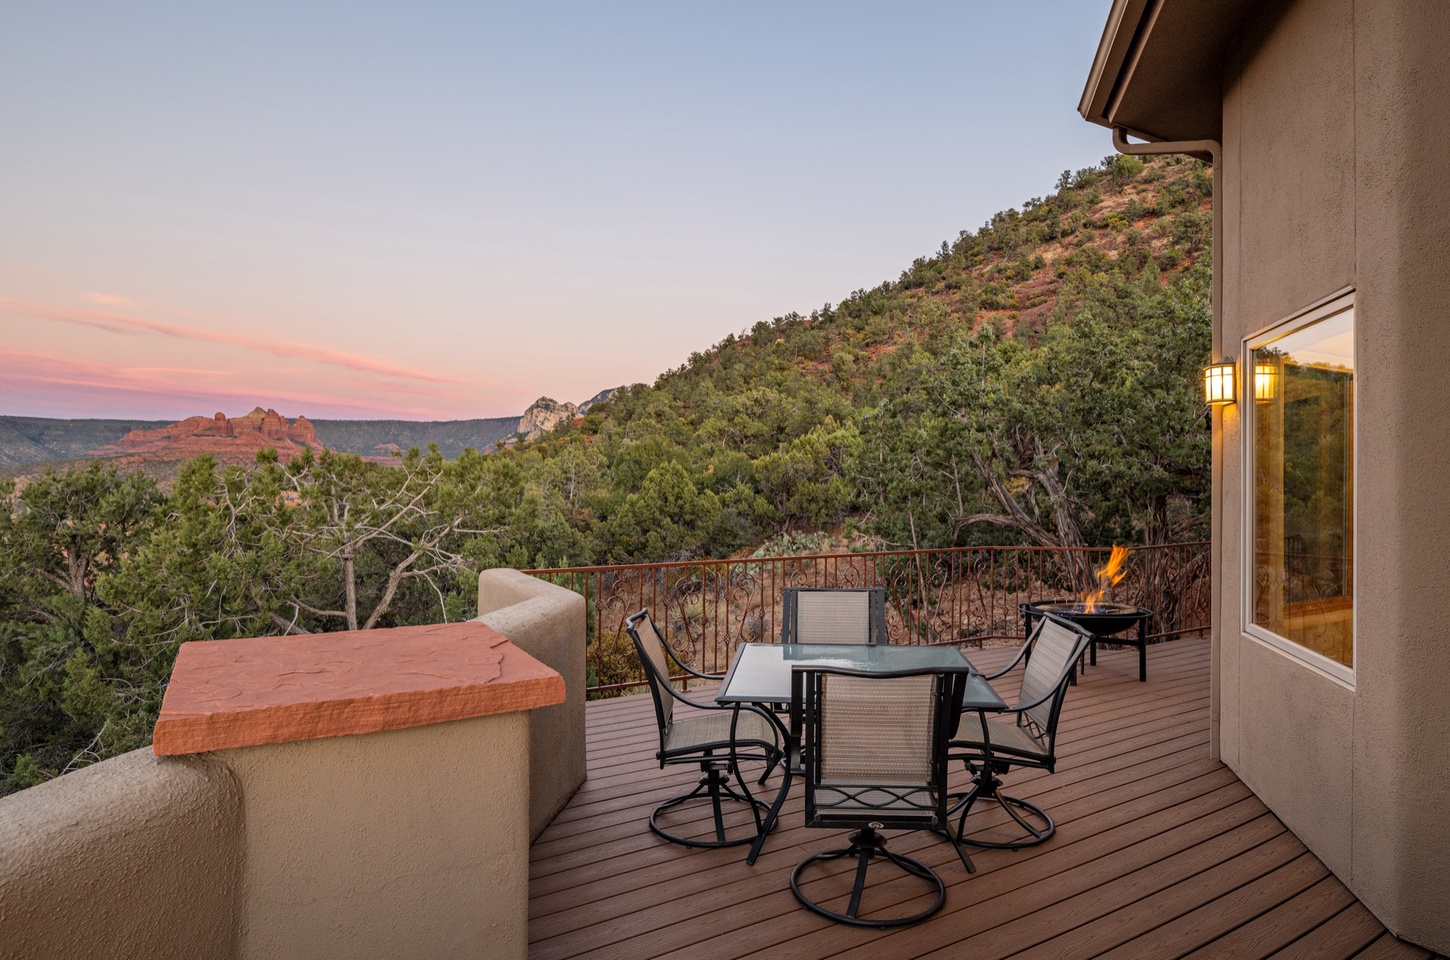 Located on a hillside near the Sedona airport